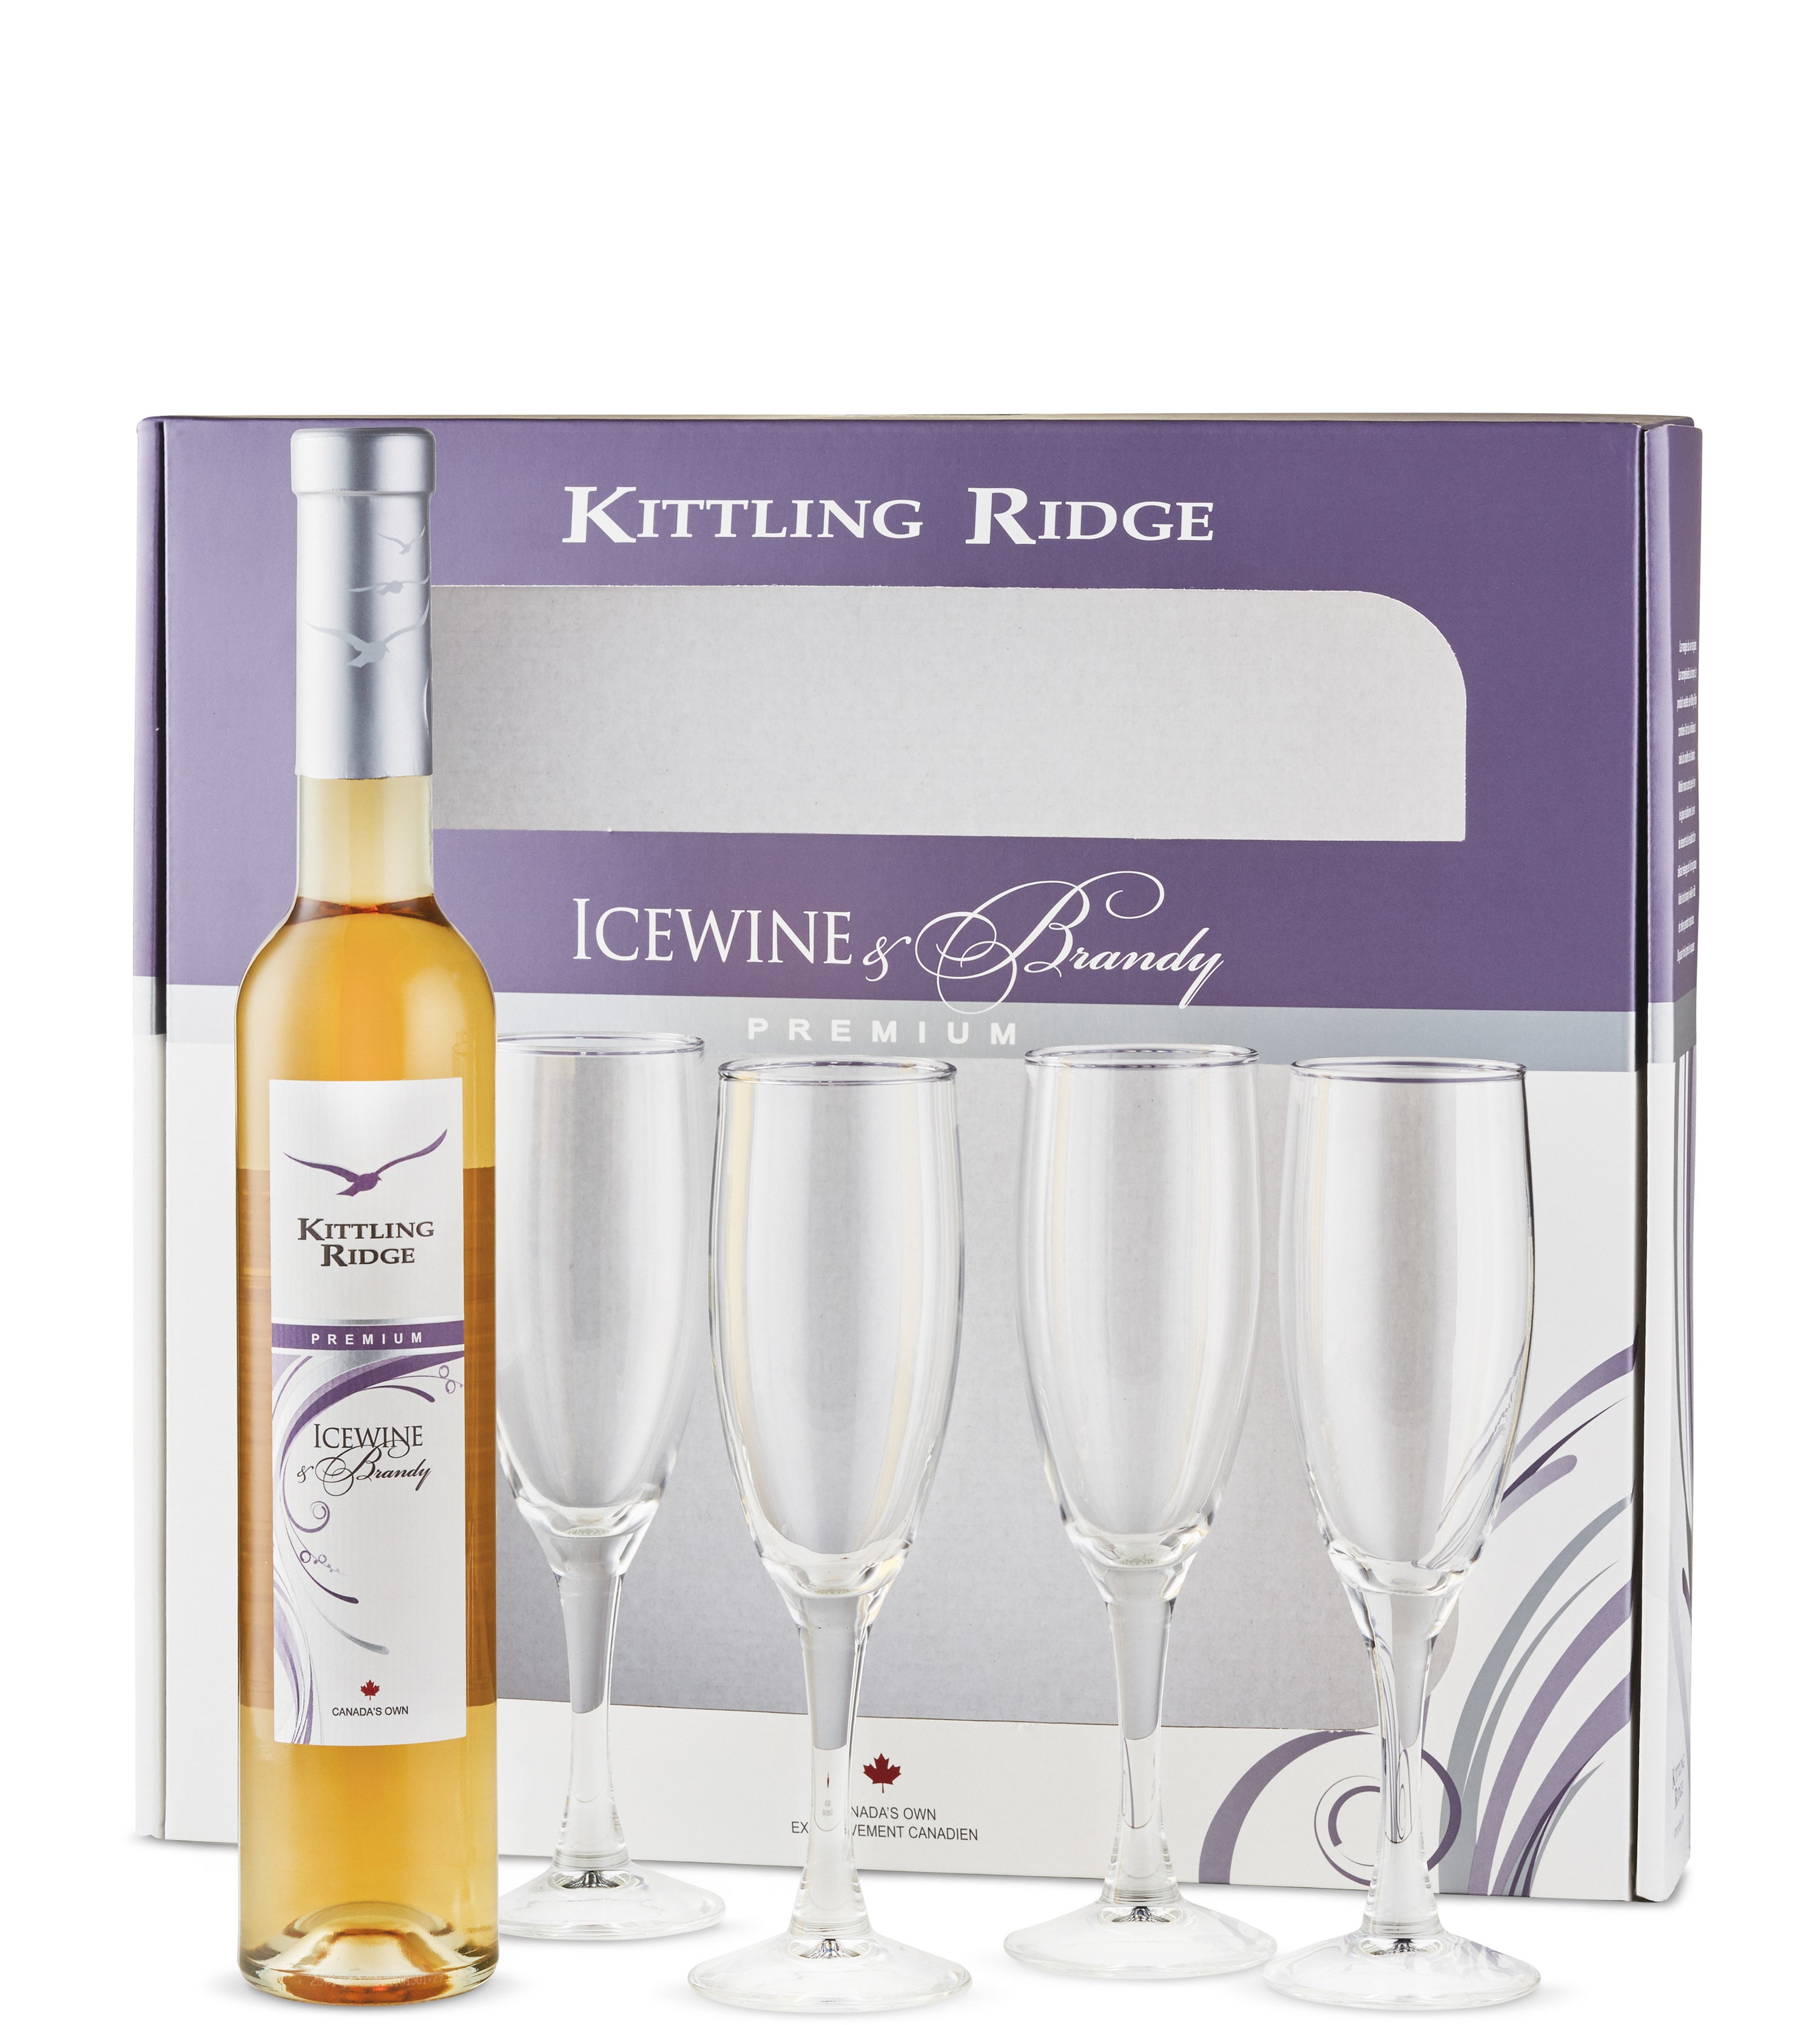 A bottle of icewine next to four tall flute glasses